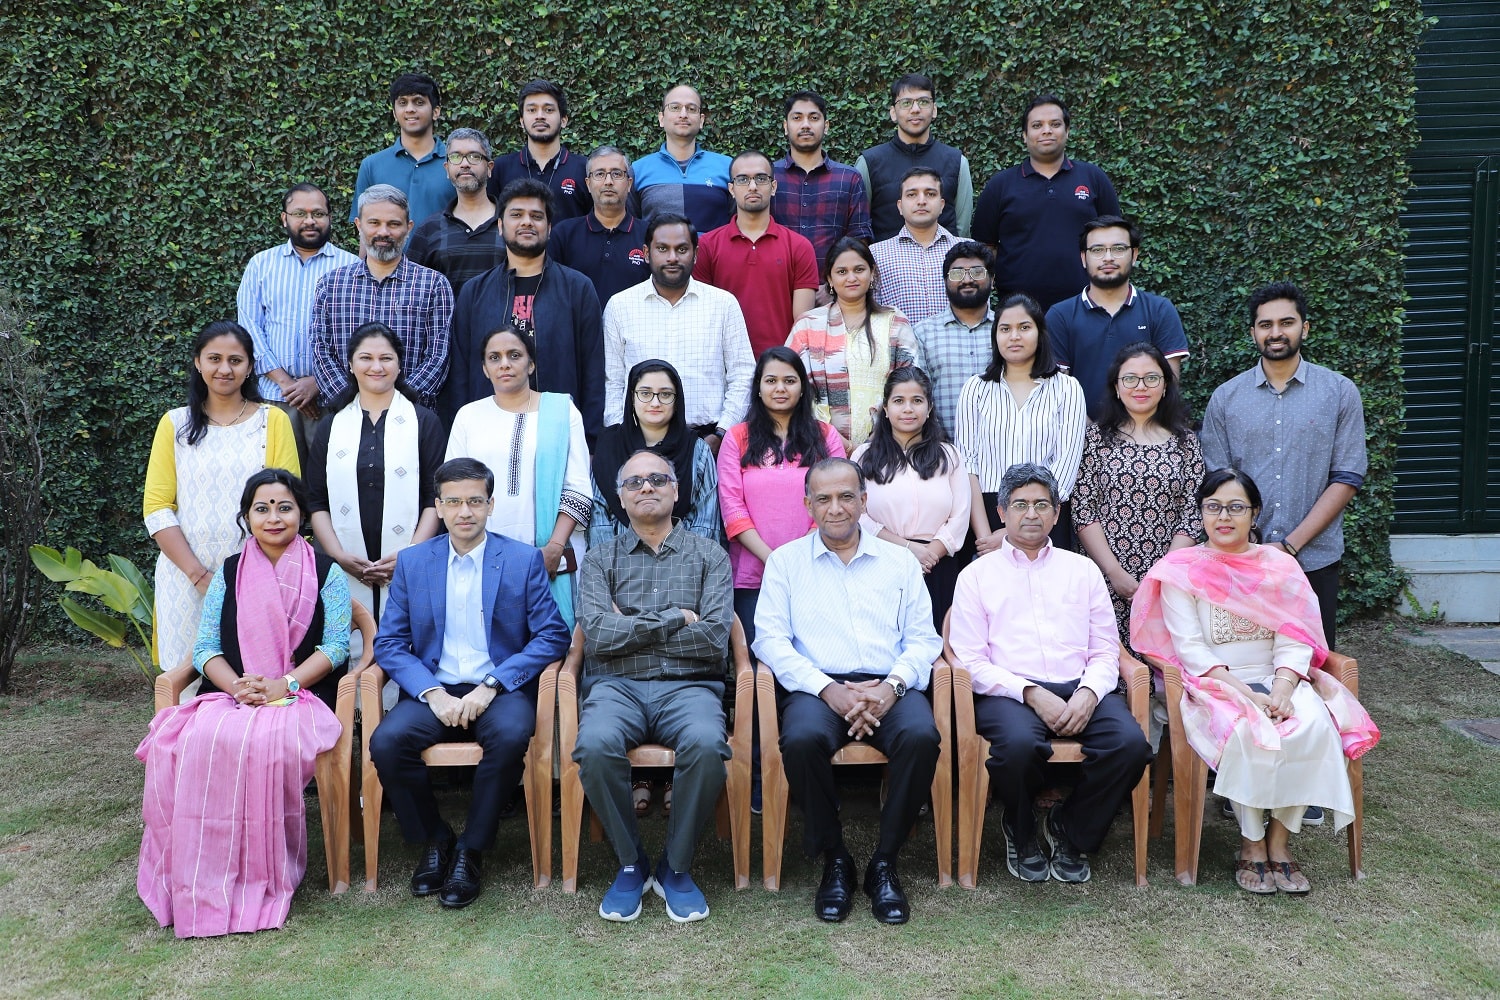 The participants with Programme Directors Prof. Sourav Mukherji (second from left) and Dr. Arun Pereira (third from right), Prof. Chetan Subramanian (third from left), Dean Faculty and Chairperson, Centre for Teaching and Learning, Prof. Ananth Krishnamurthy (second from right), Chairperson, IIMB Doctoral Programme, and the CTL team.